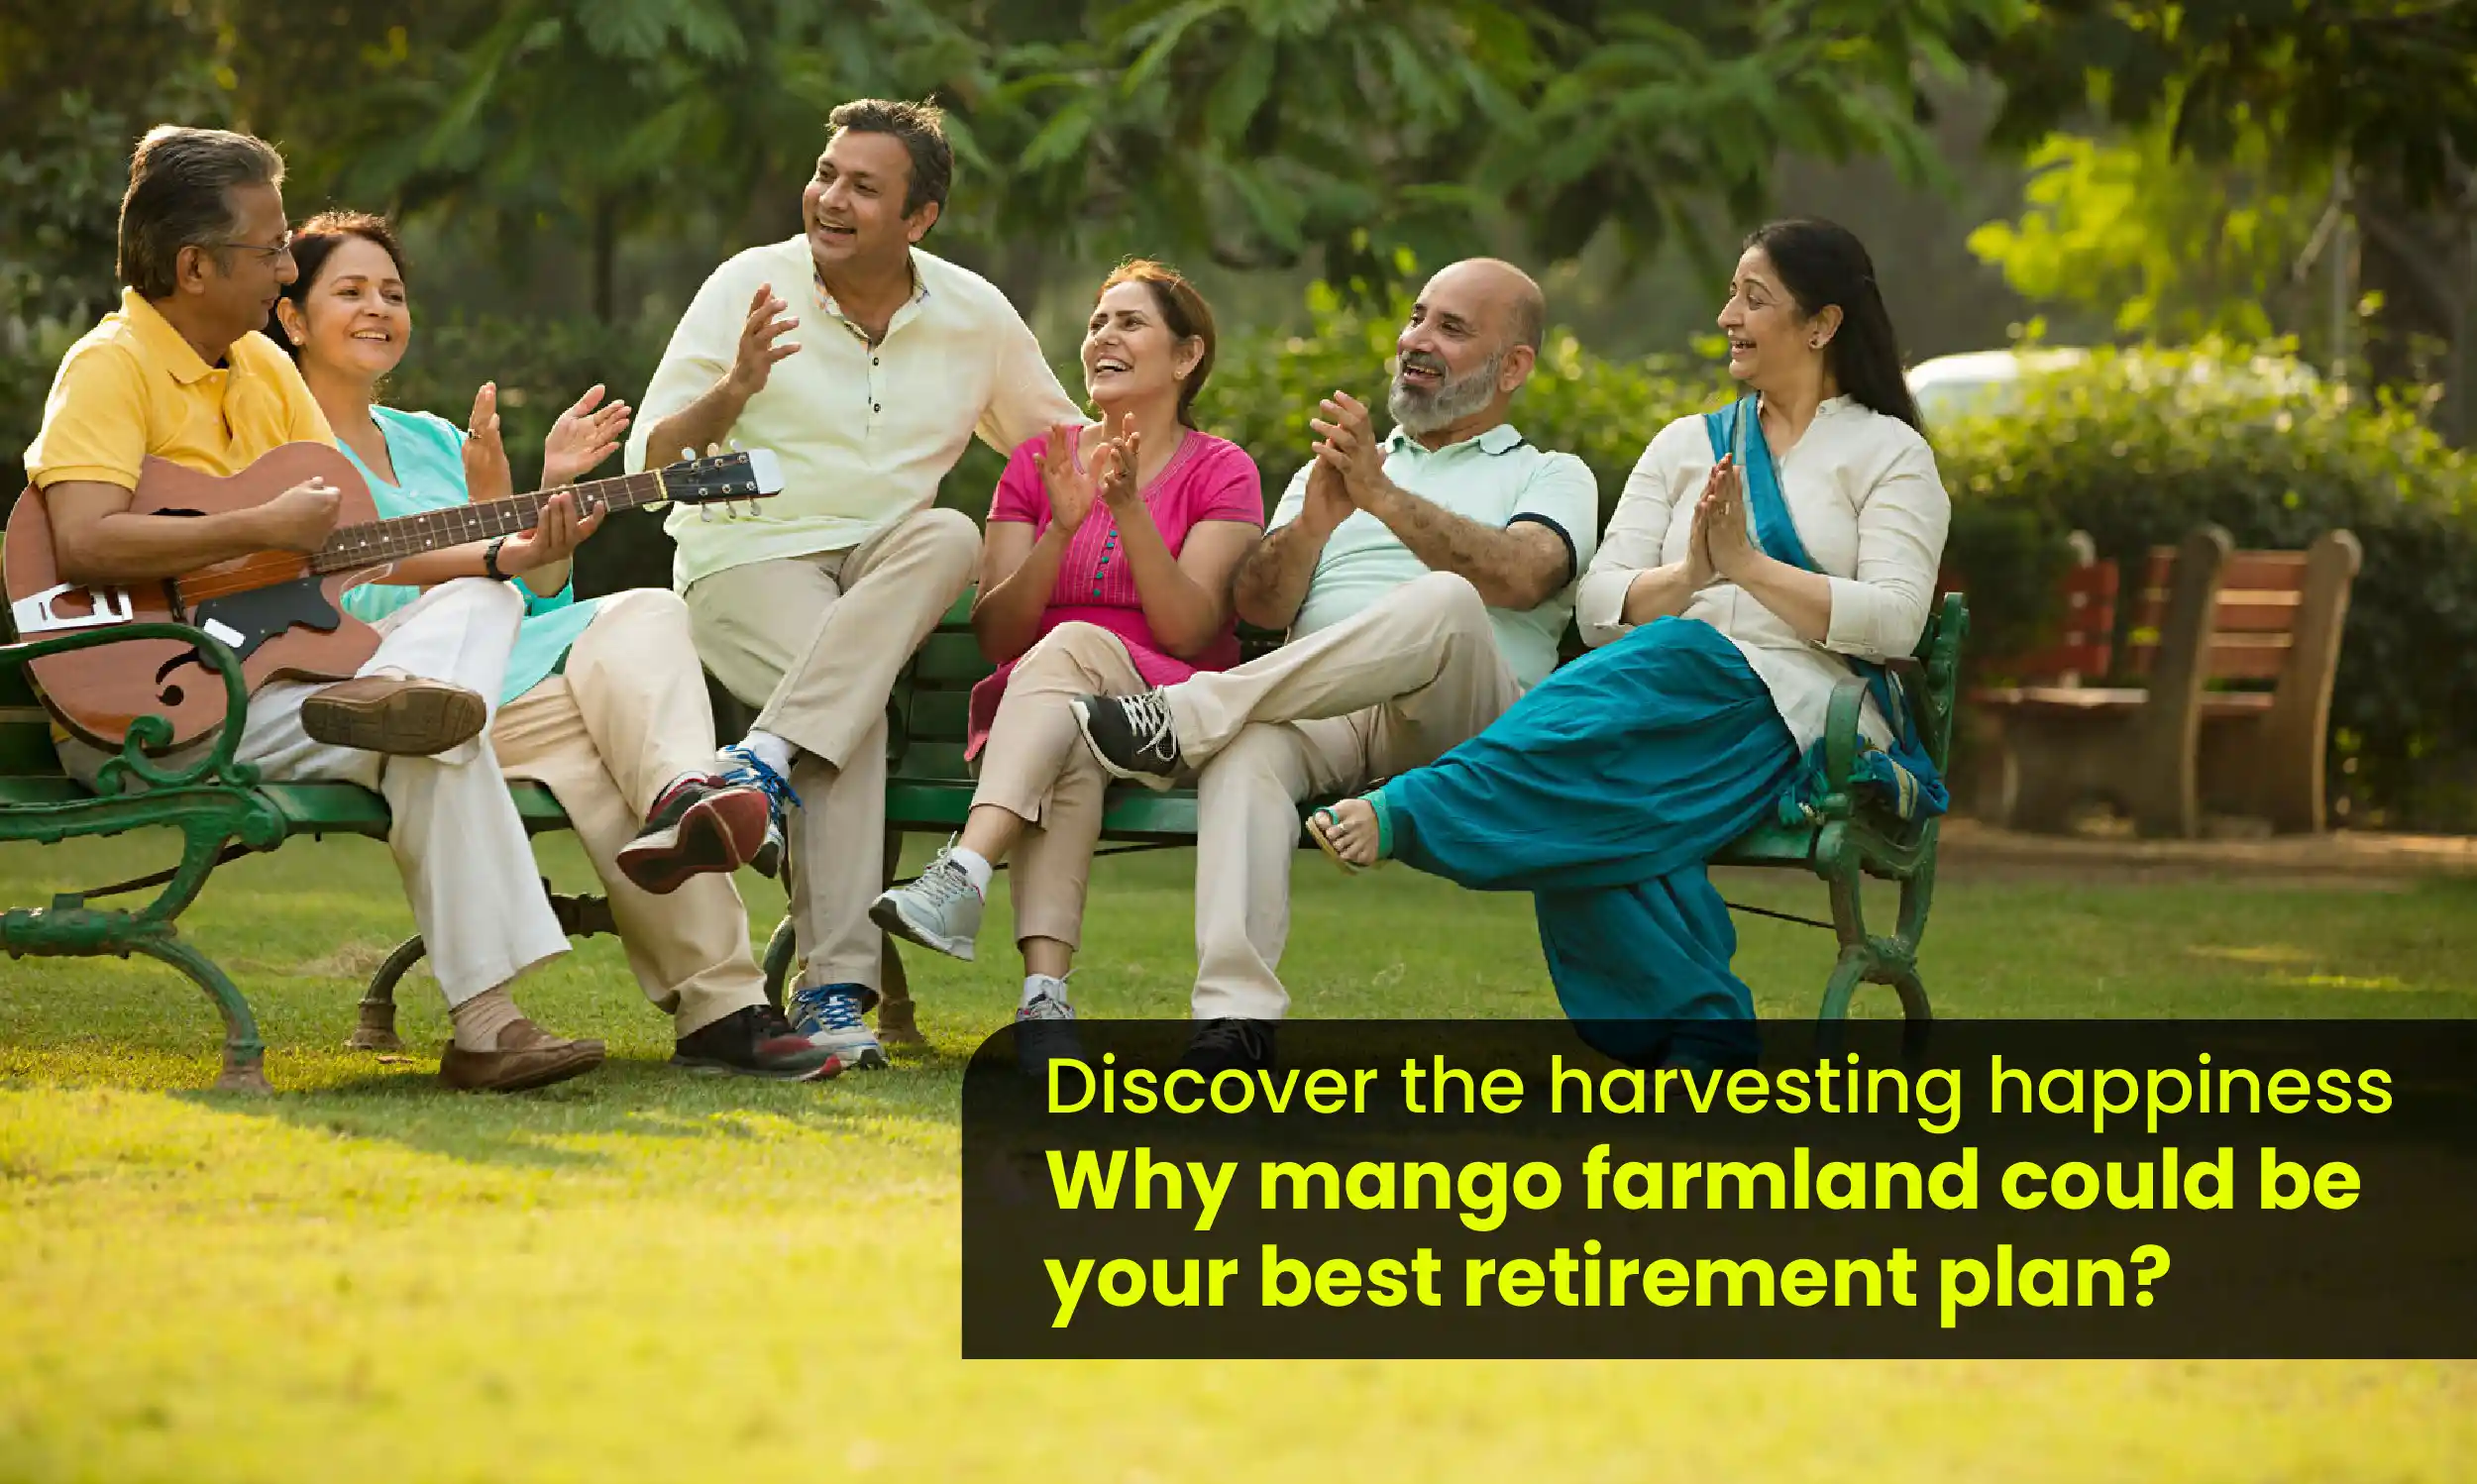 Discover happiness in retirement with the best mango farmland